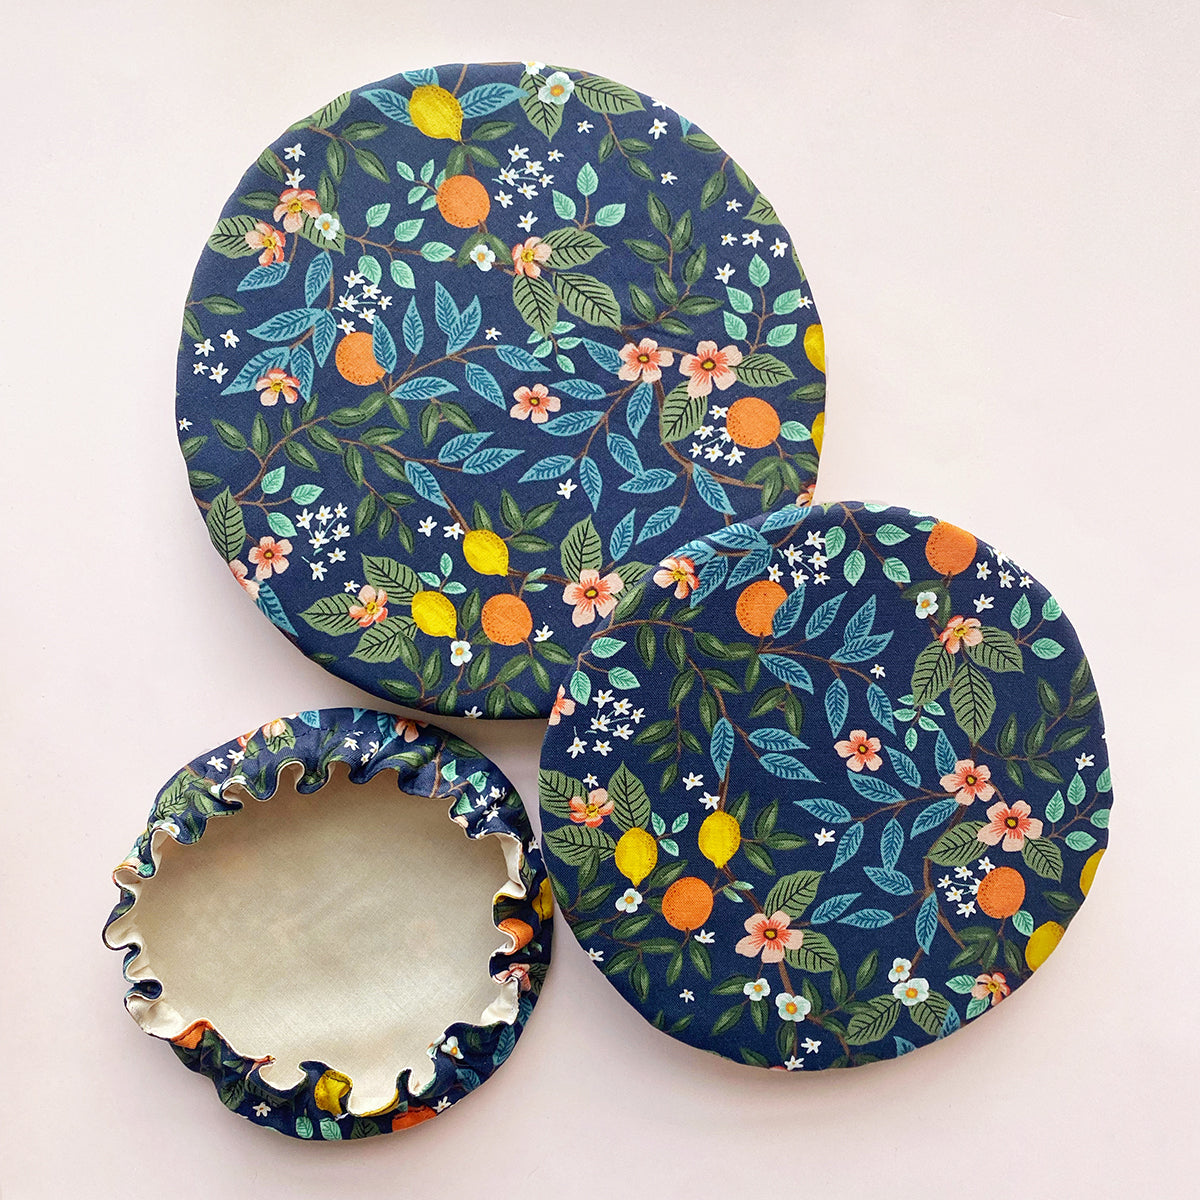 Dark Blue Navy Citrus Botanical Floral Reusable Washable Cotton Fabric Food Baking Bread Mixer Bowl Covers | Zero Waste Eco-friendly Sustainable Gift Kitchen Tool Accessories